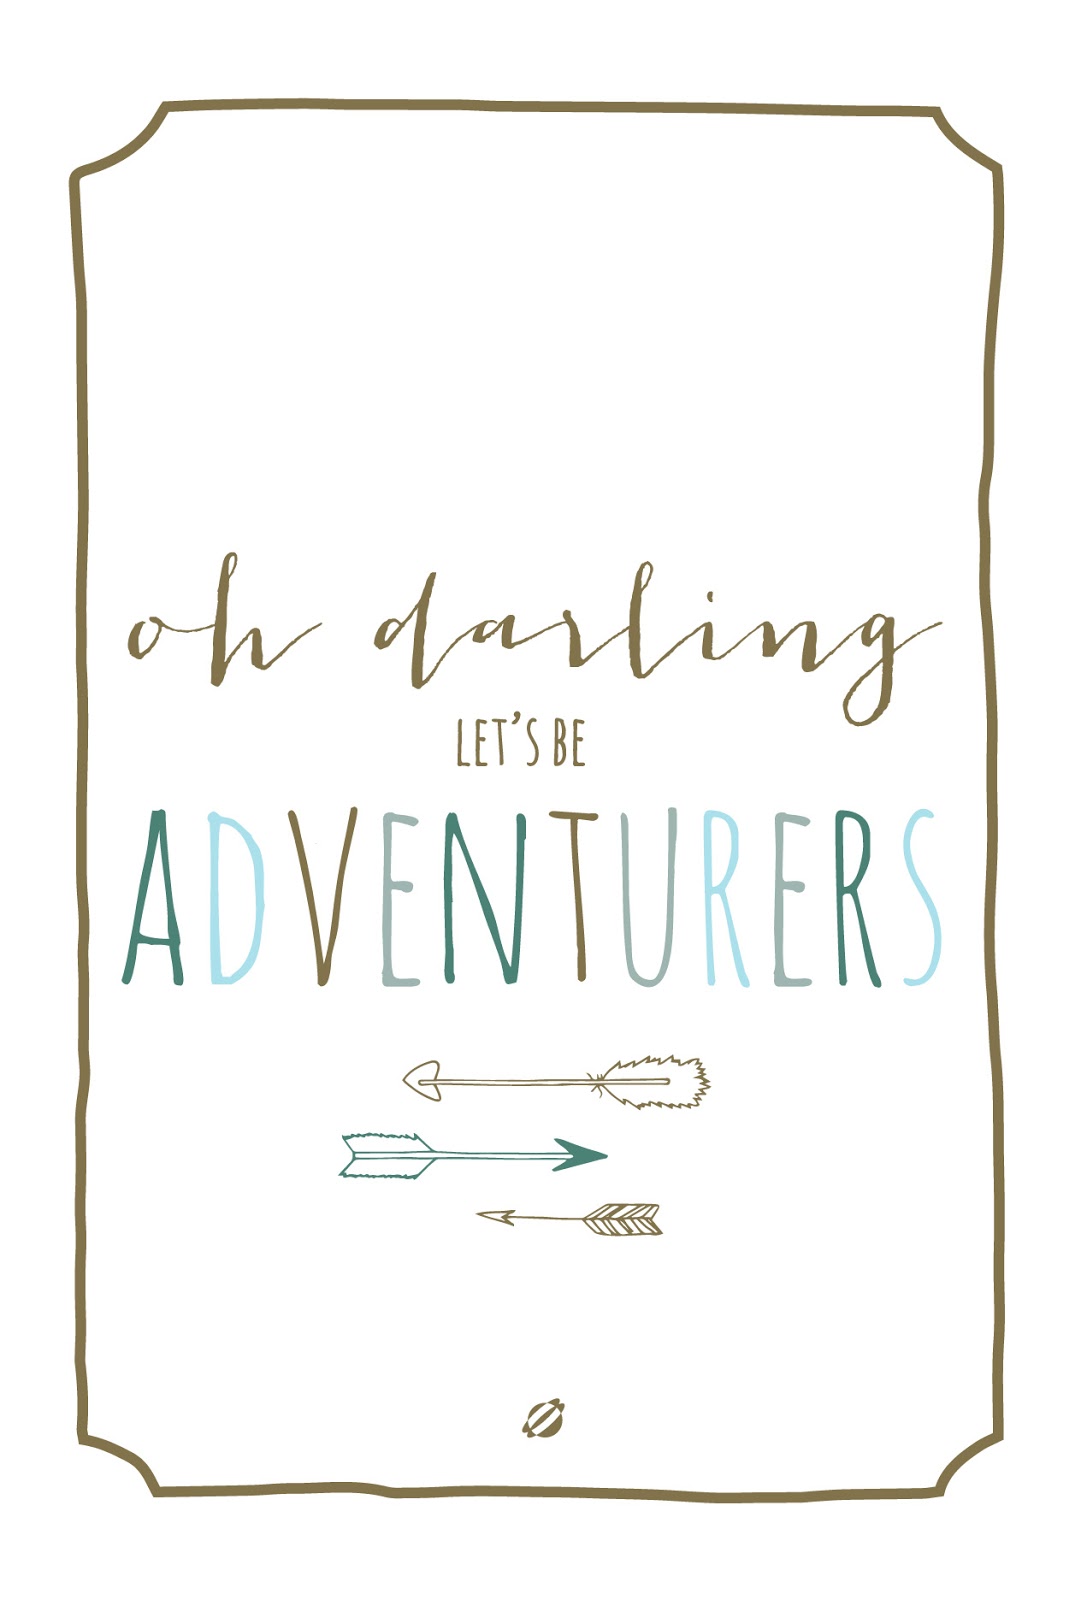 LostBumblebee ©2014 Let's Be Adventurers FREE PRINTABLE -PERSONAL USE ONLY